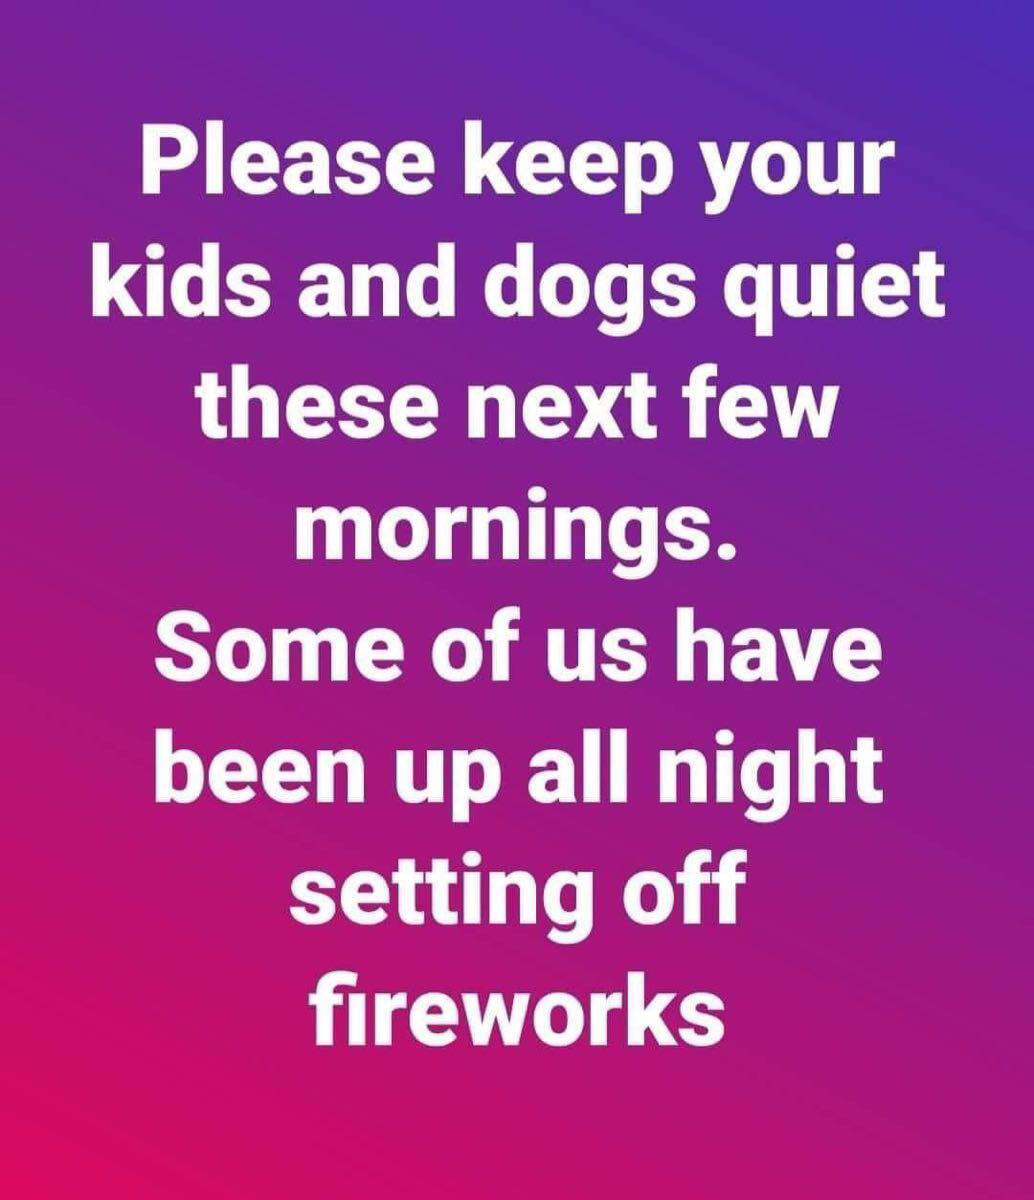 i-don-t-have-kids-and-i-don-t-have-dogs-and-i-don-t-shoot-off-fireworks-i-just-thought-this-was